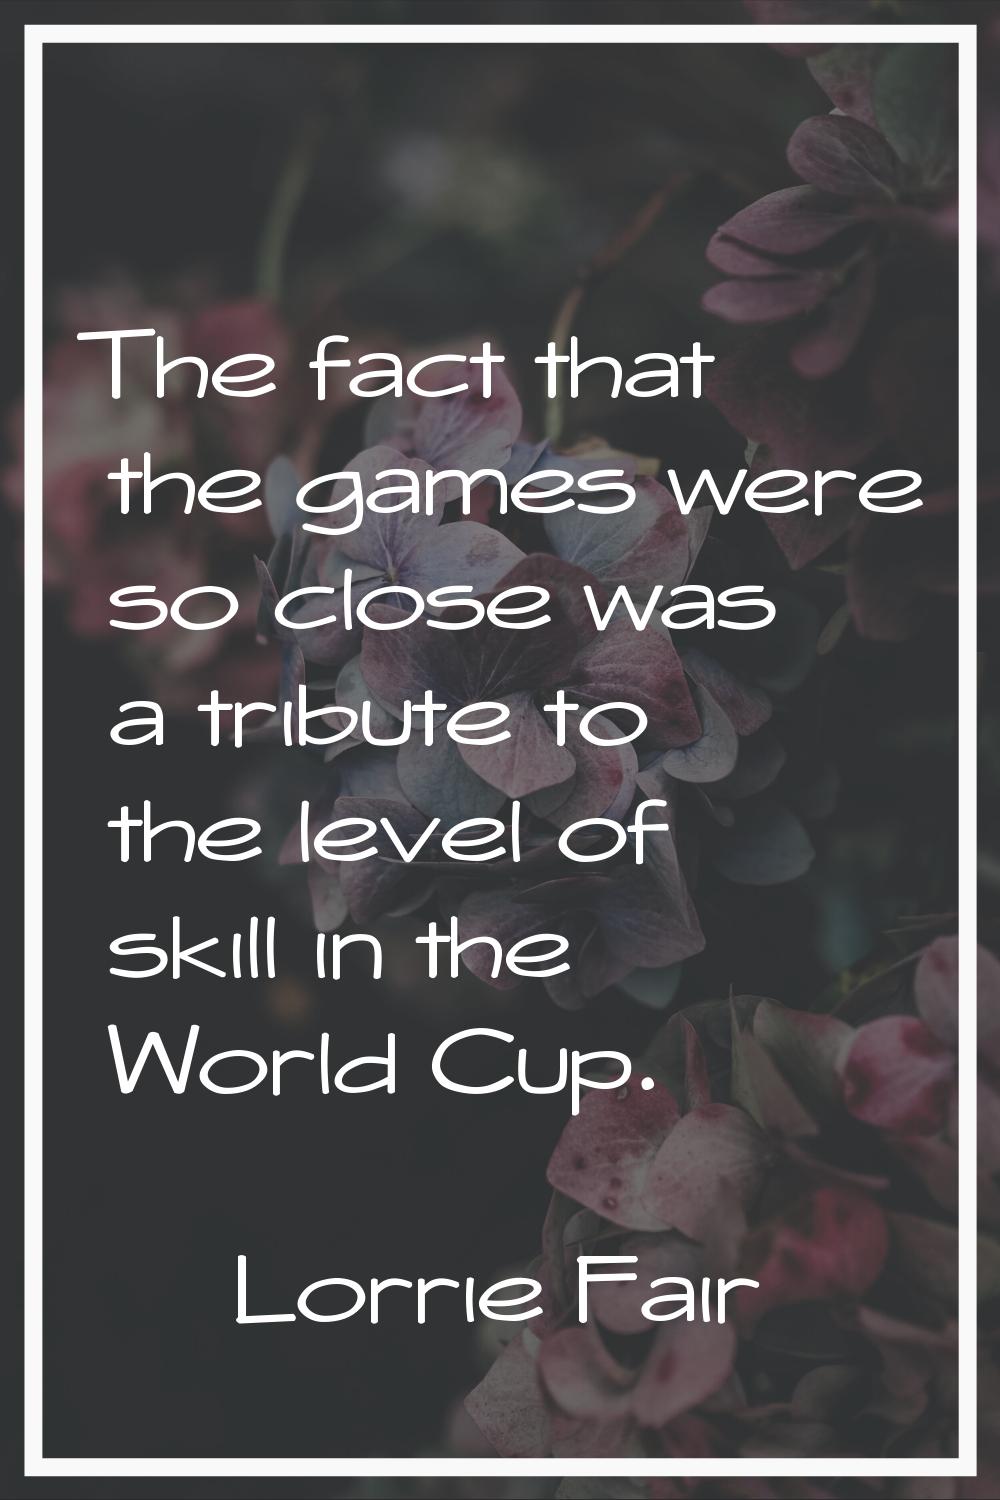 The fact that the games were so close was a tribute to the level of skill in the World Cup.